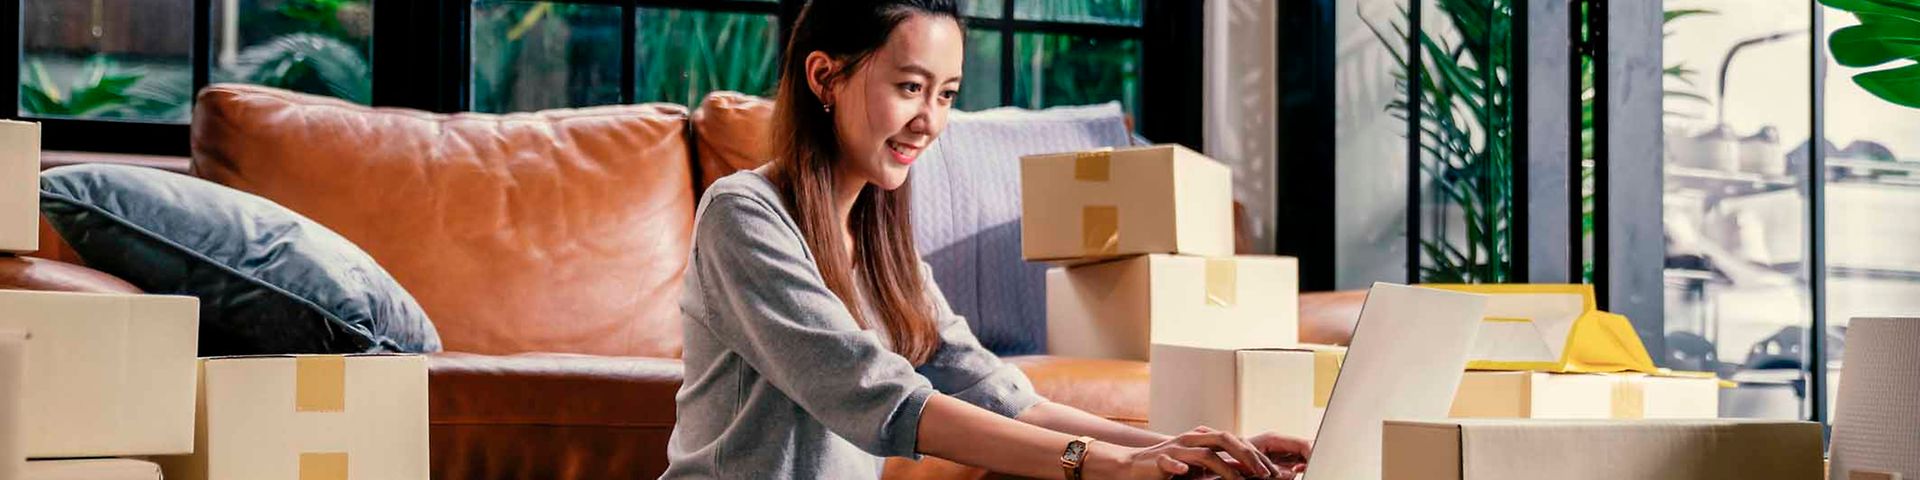 A woman sits in the middle of packages.